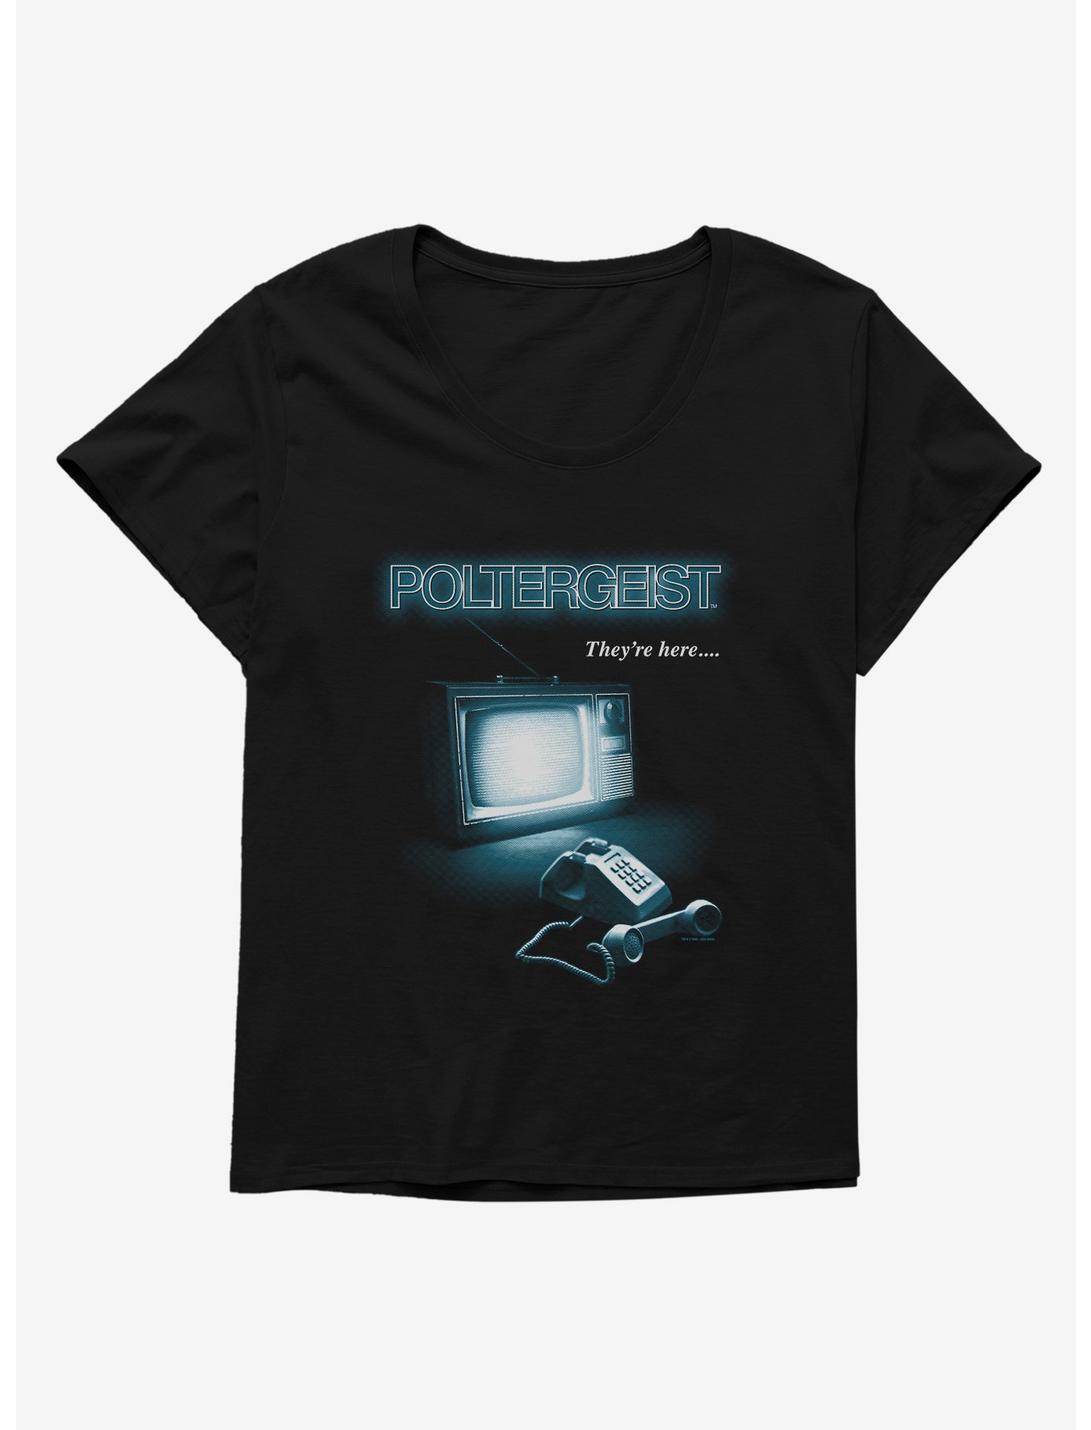 Poltergeist They're Here? Girls T-Shirt Plus Size, BLACK, hi-res